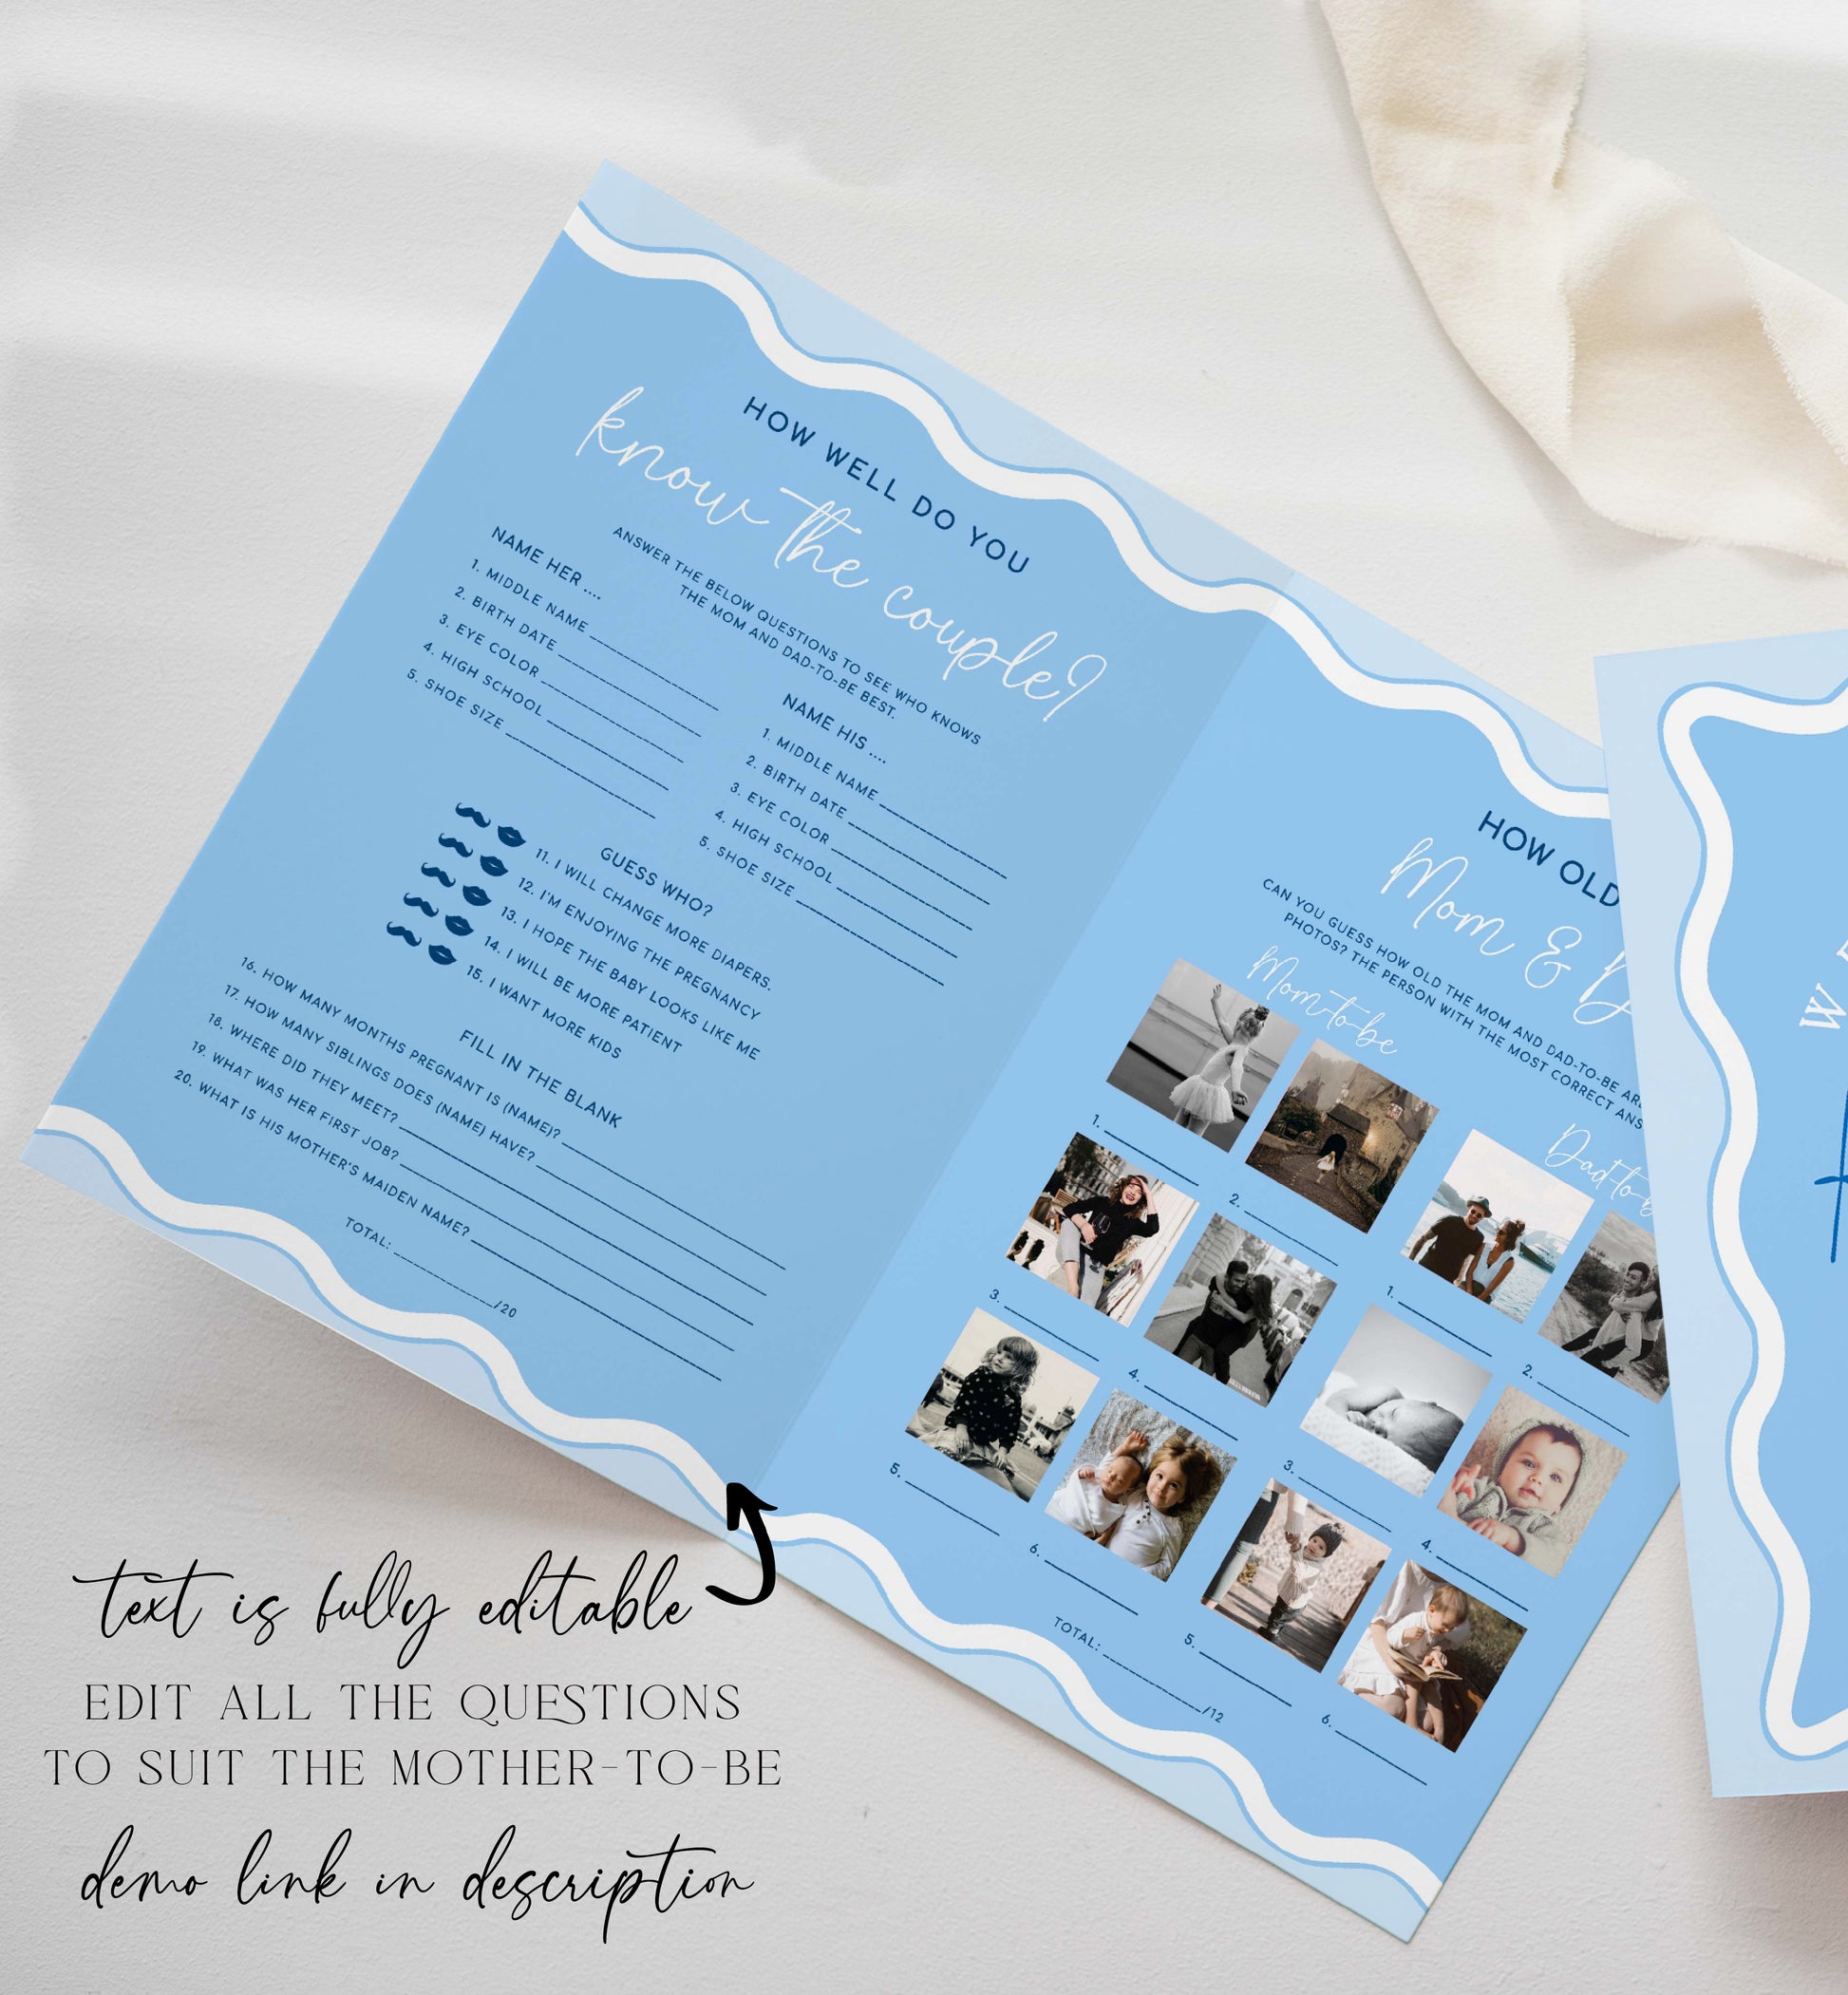 Blue Wavy Baby Shower Menu and Games Booklet, Modern Wavy Line Baby Shower Game, Printable Menu Template, Boy Baby Shower Games, Wave